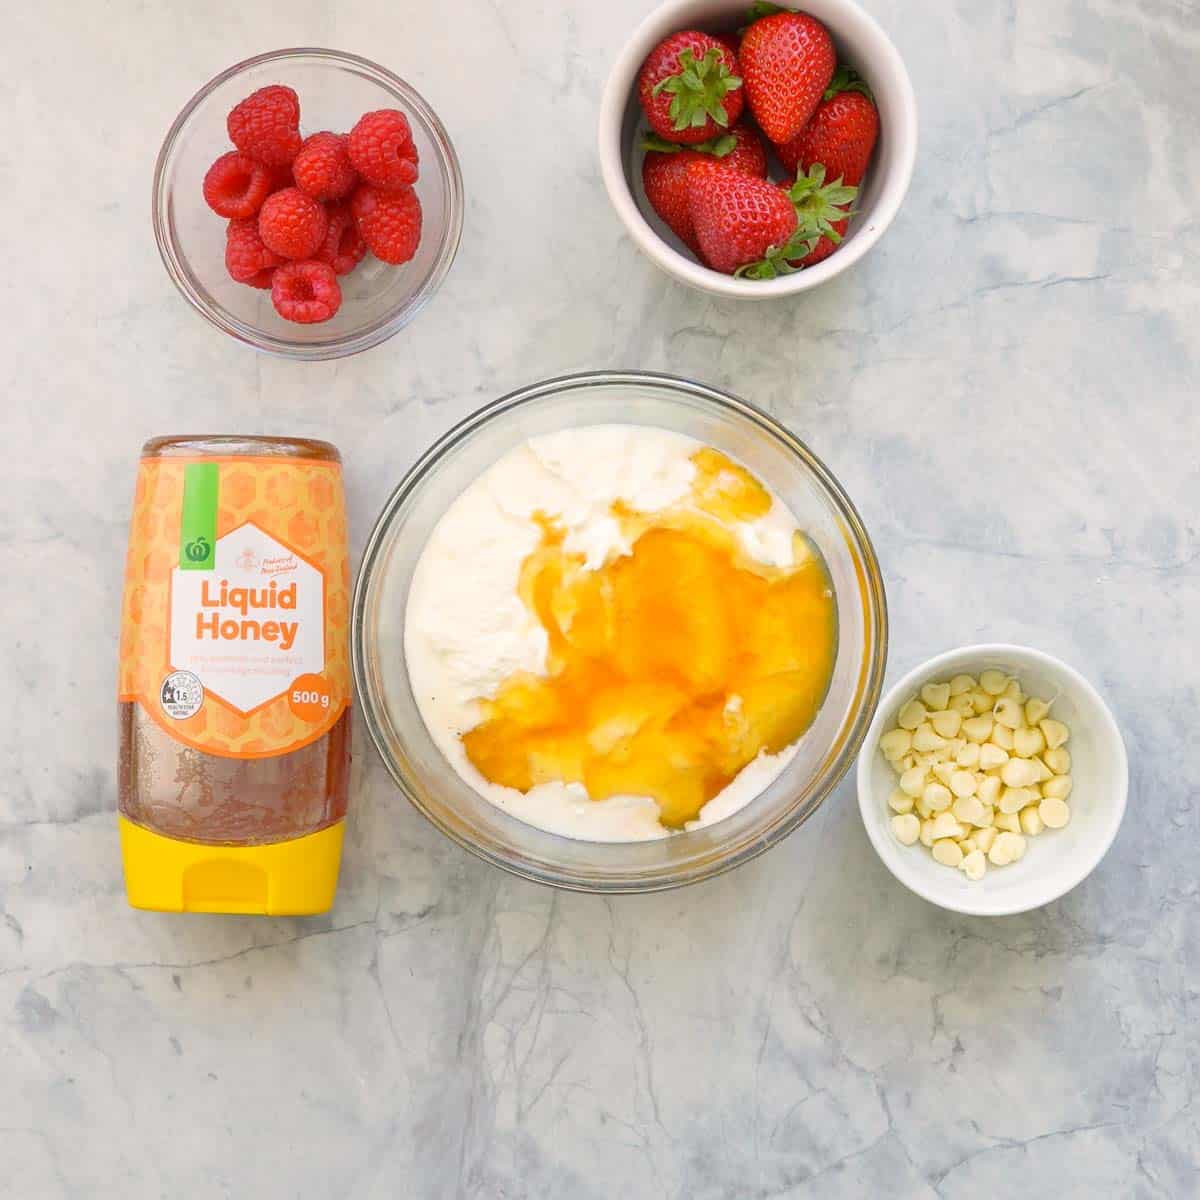 A small glass mixing bowl with yogurt, vanilla extract and honey sitting next to a bottle of liquid honey and  ramekins of raspberries, strawberries and white chocolate drops on the bench